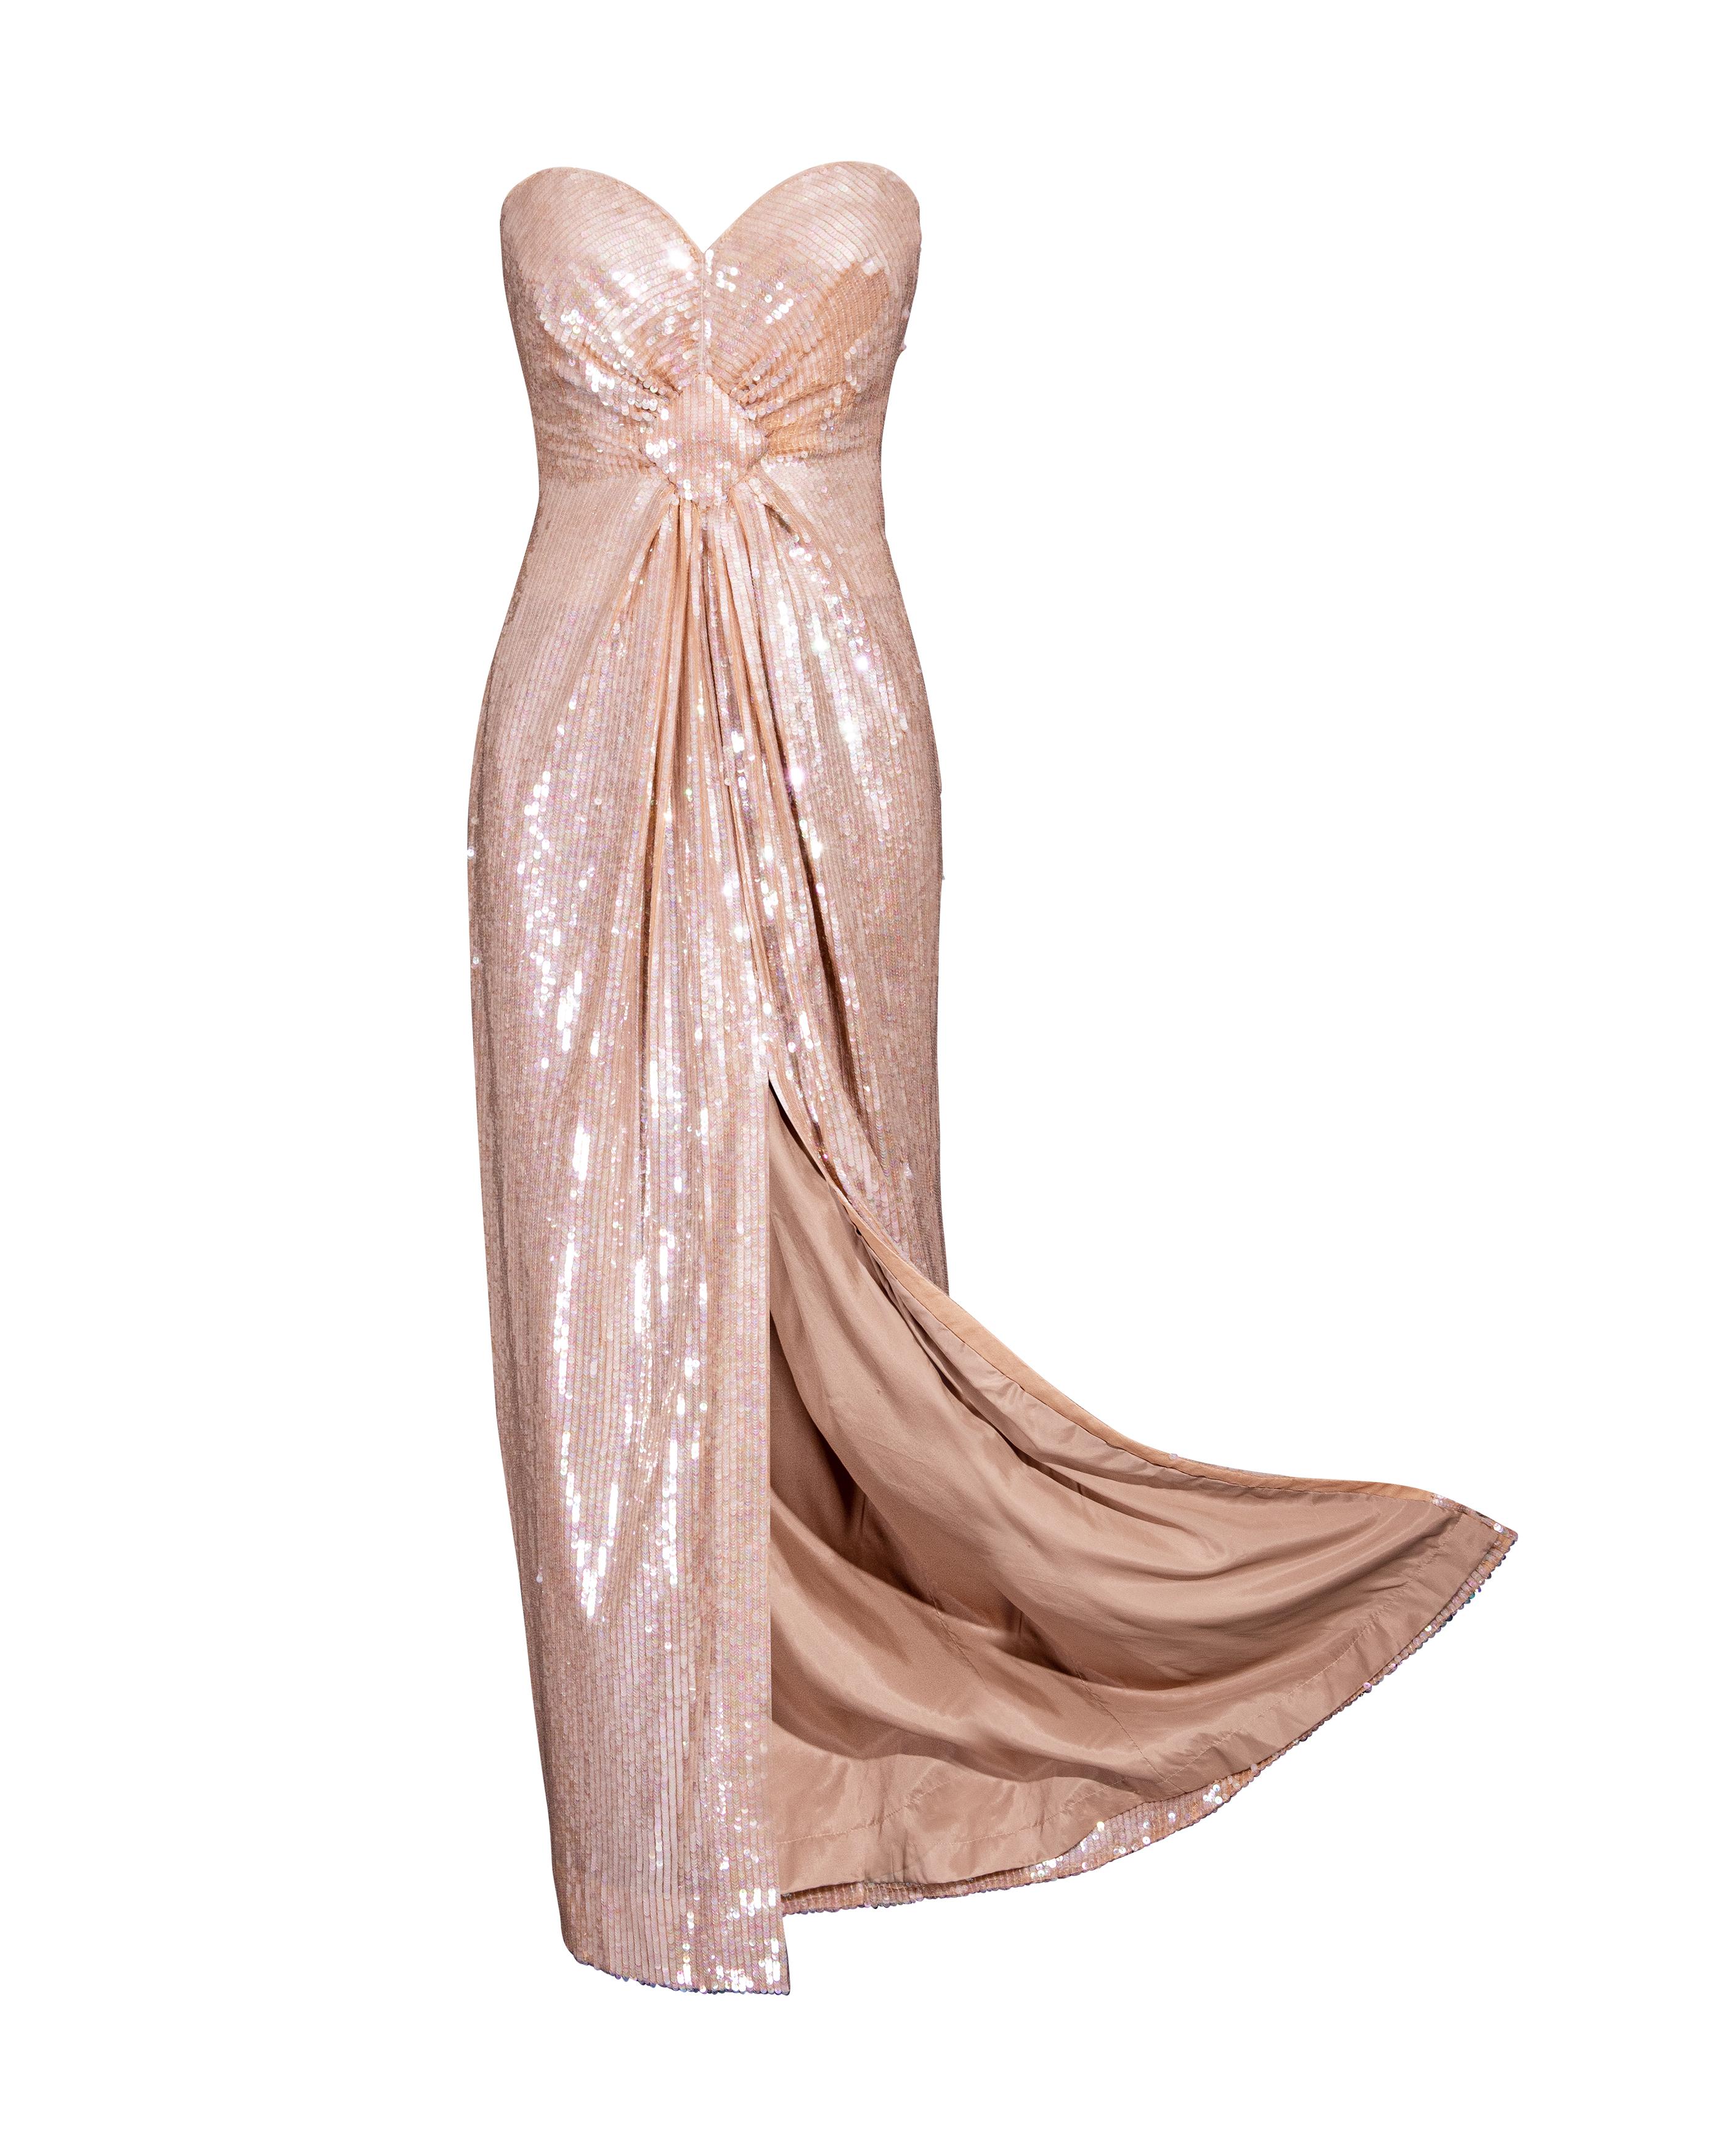 1980's John Anthony Peach Strapless Sequin Gown For Sale 3